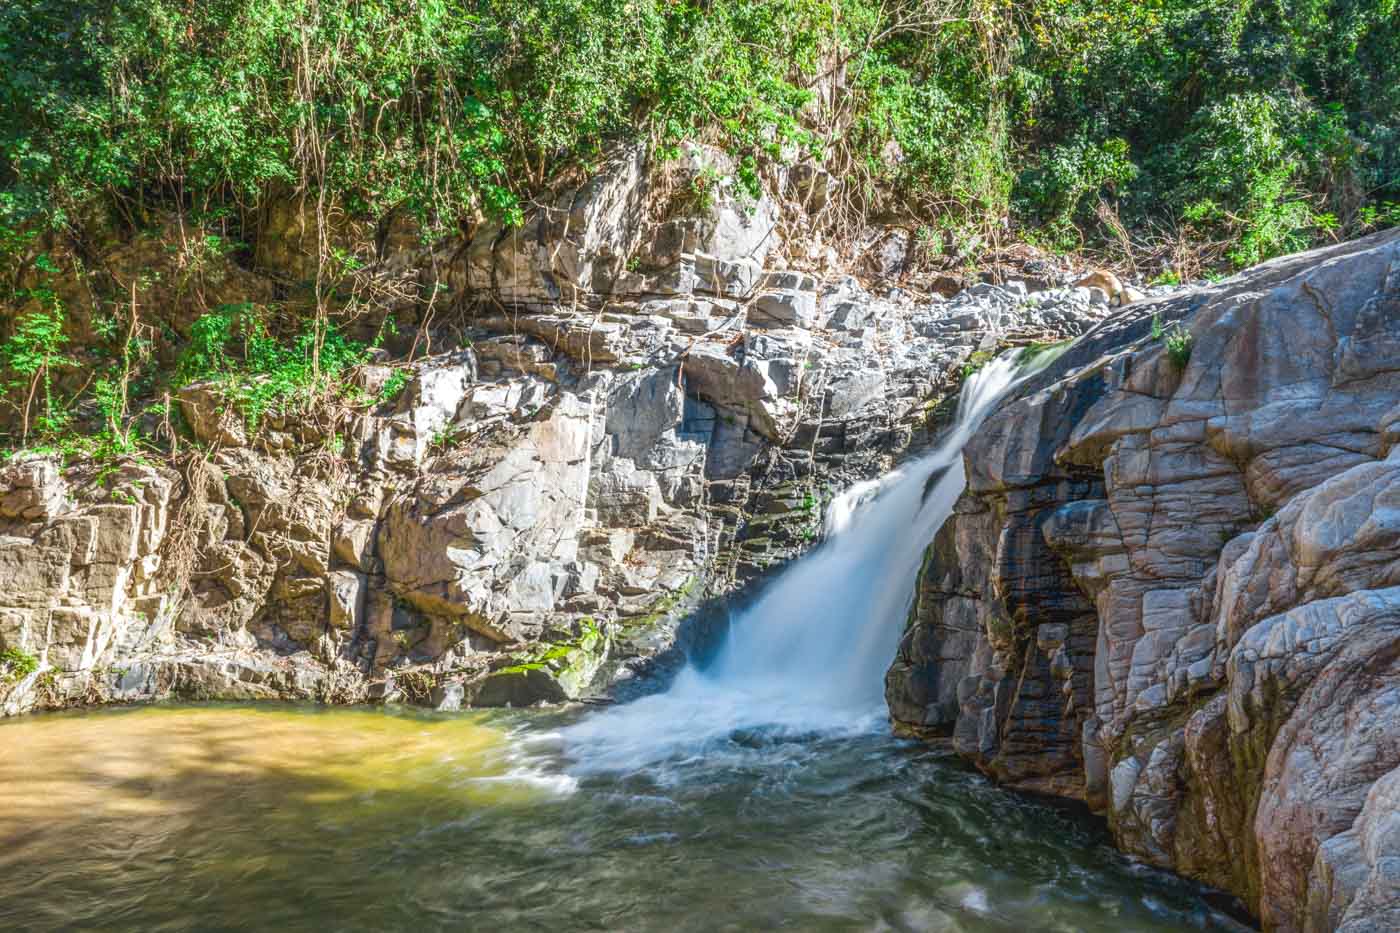 A long exposure of Yelapa Waterfall 2 in between rocks on a sunny day.